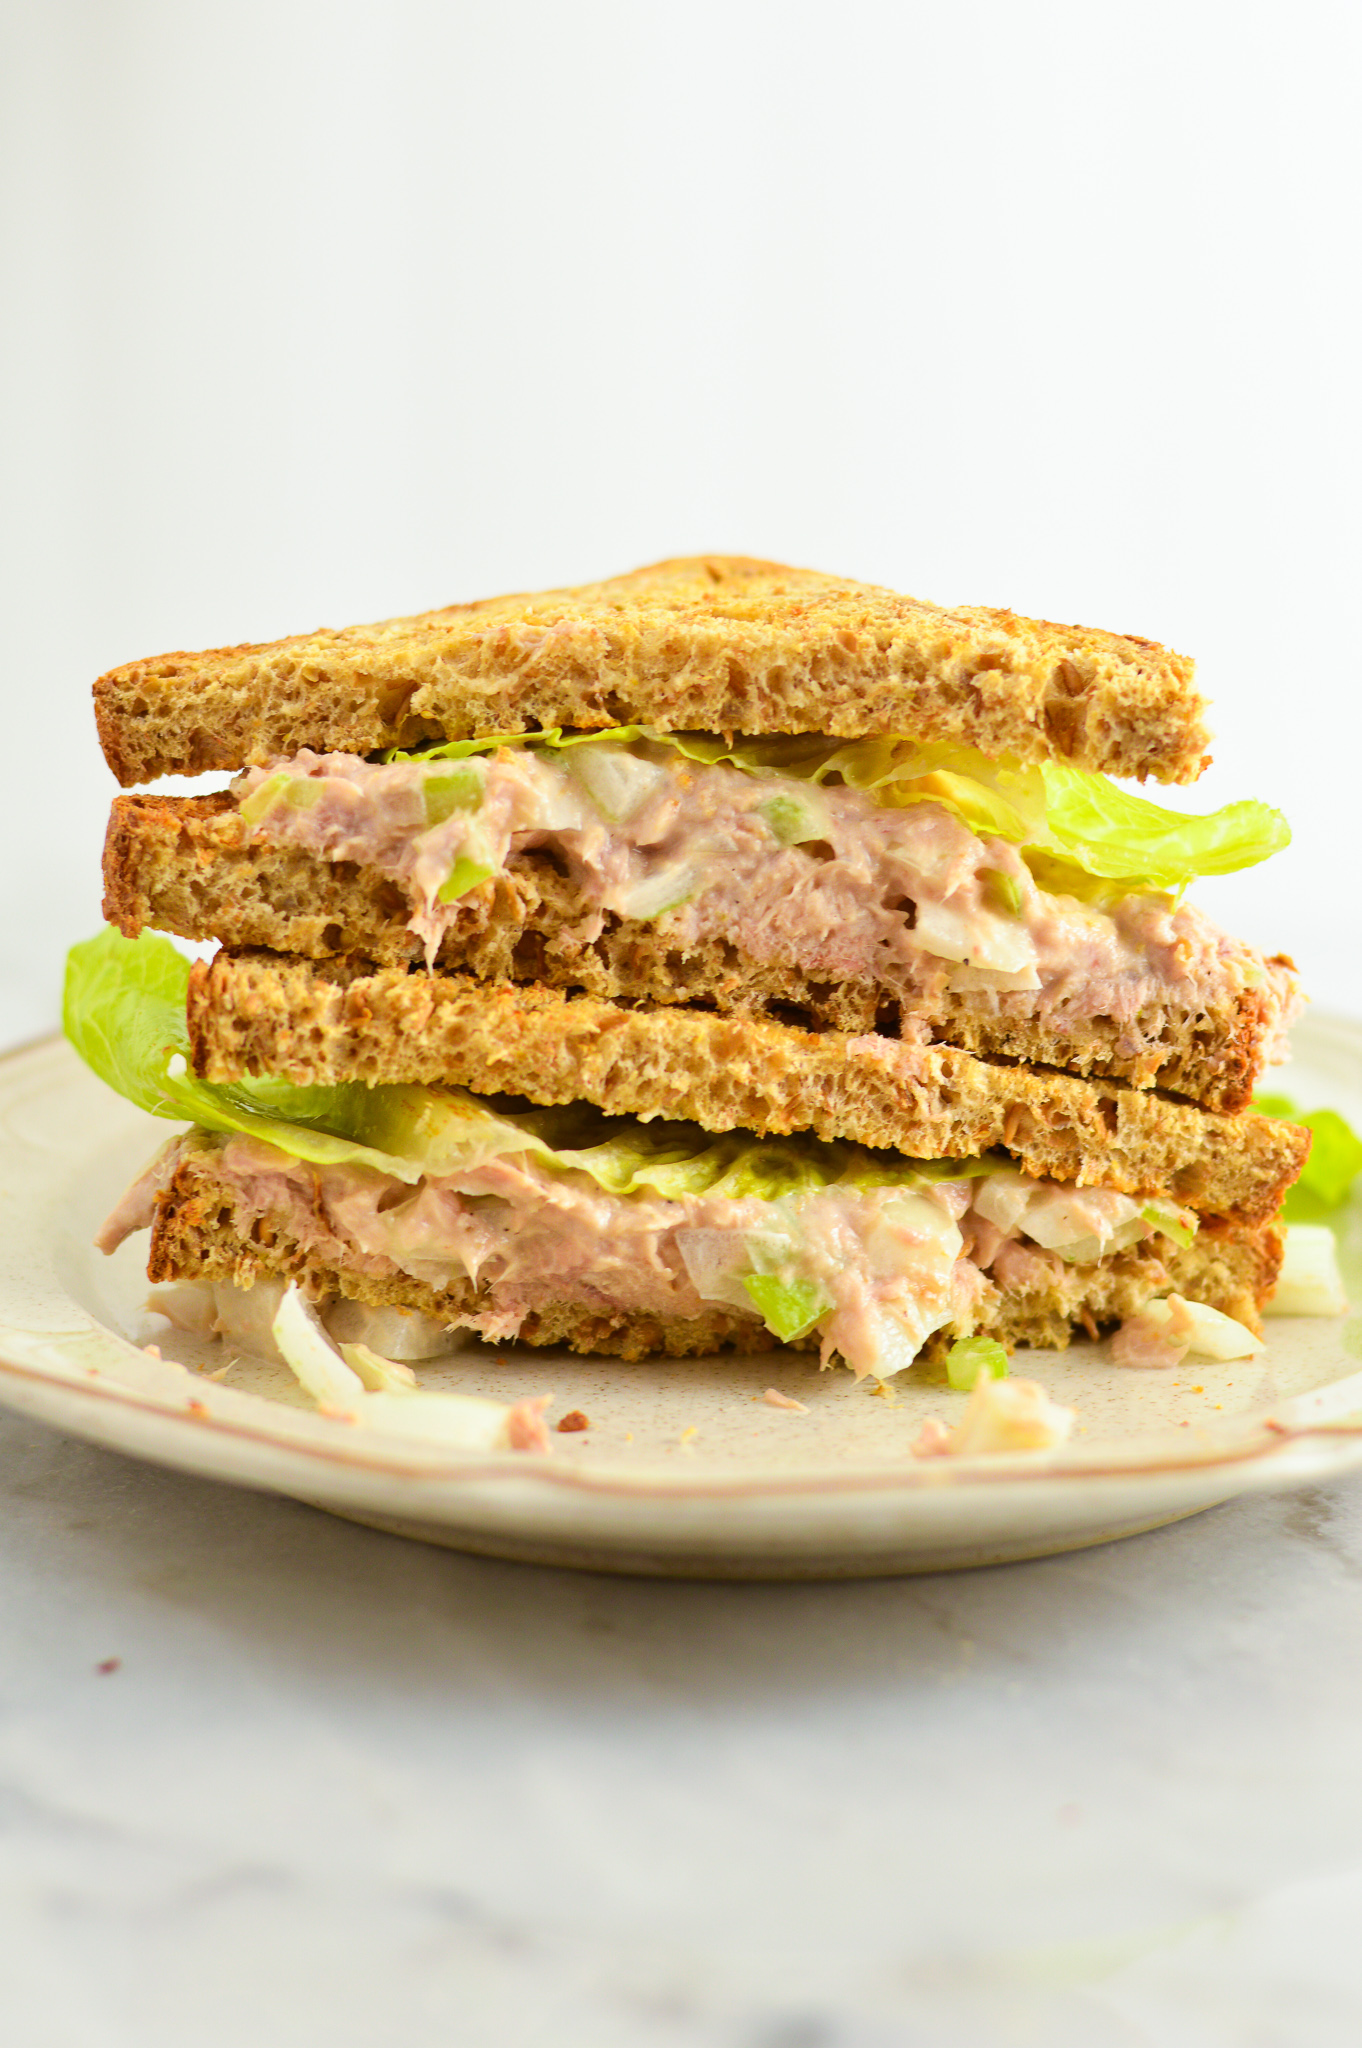 Extra Special Tuna Sandwiches